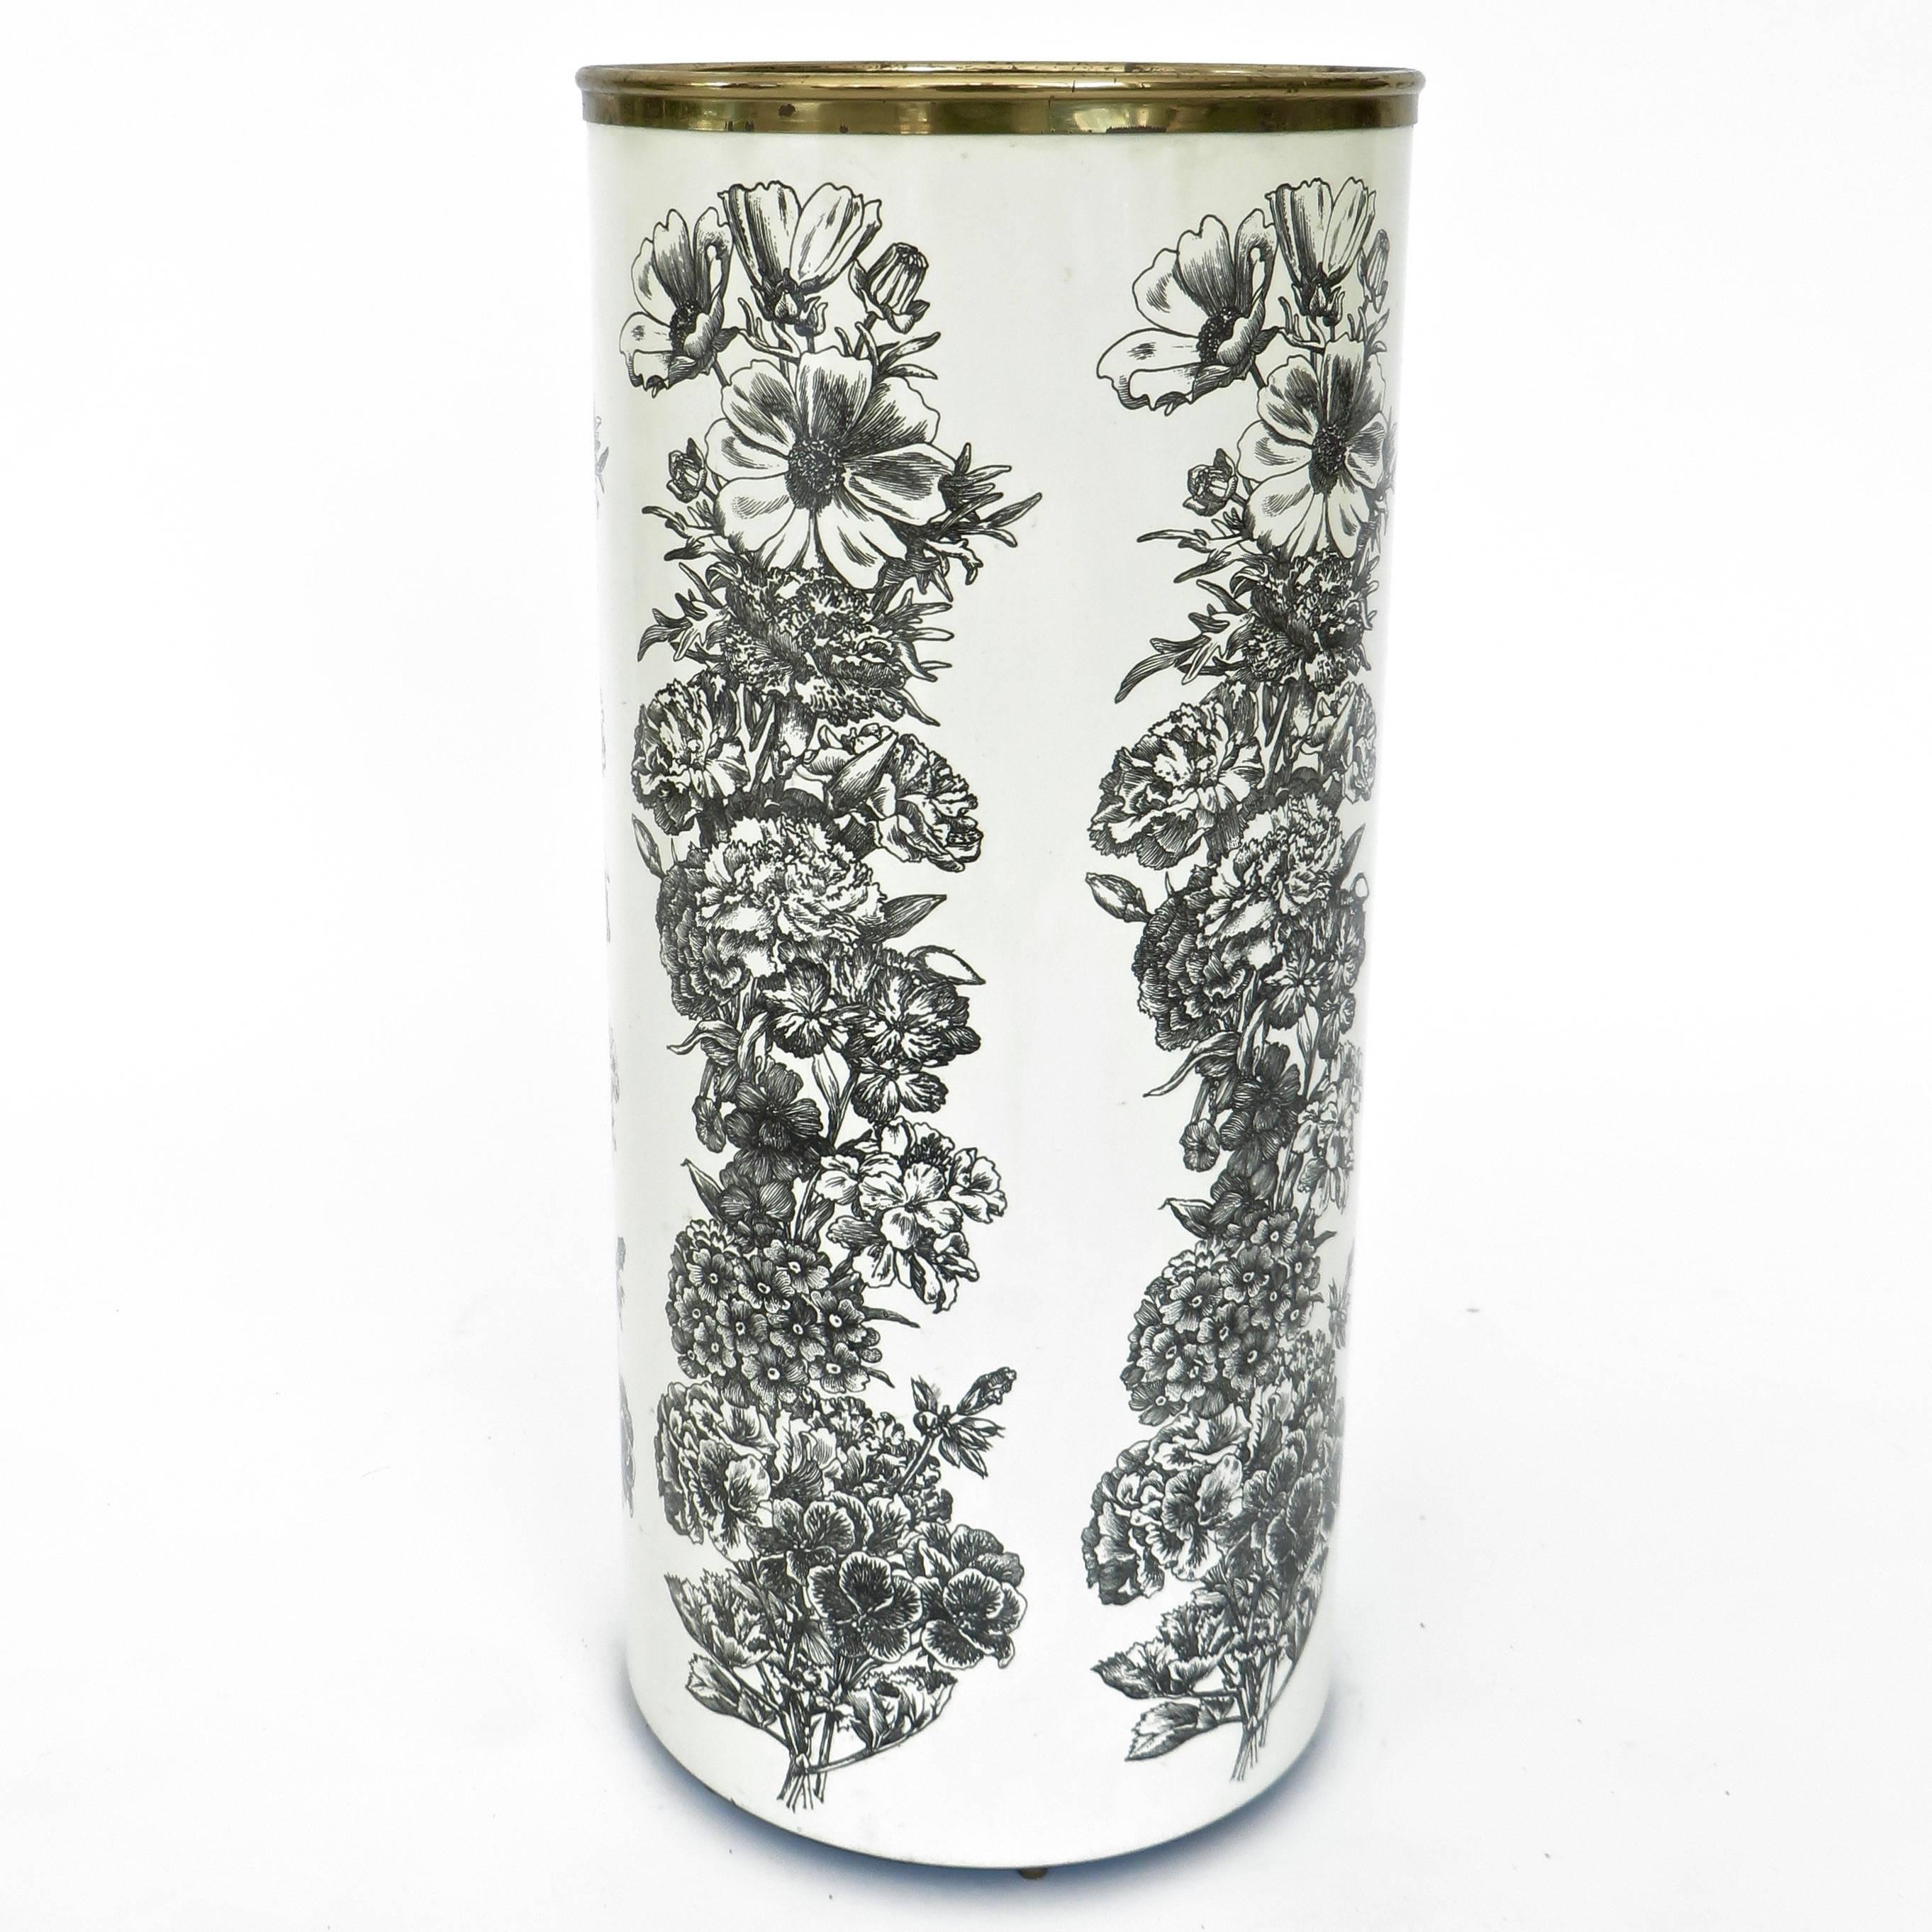 Italian metal black lithographed floral motif on white background umbrella holder stand by Piero Fornasetti.
Brass rim.
Label intact on bottom.

          